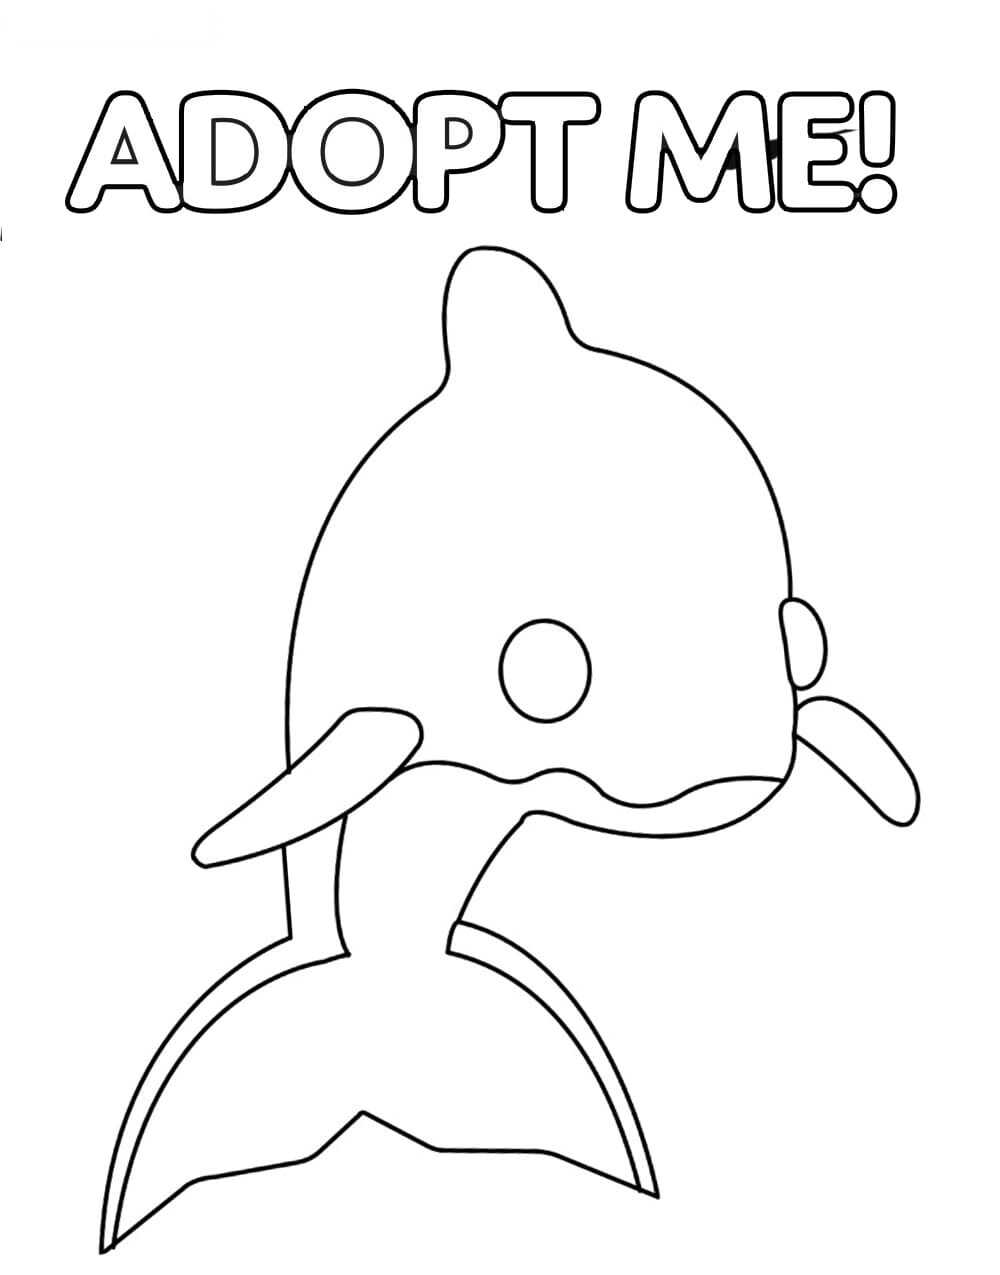 Dolphin from Adopt me features tail fins on its back Coloring Pages